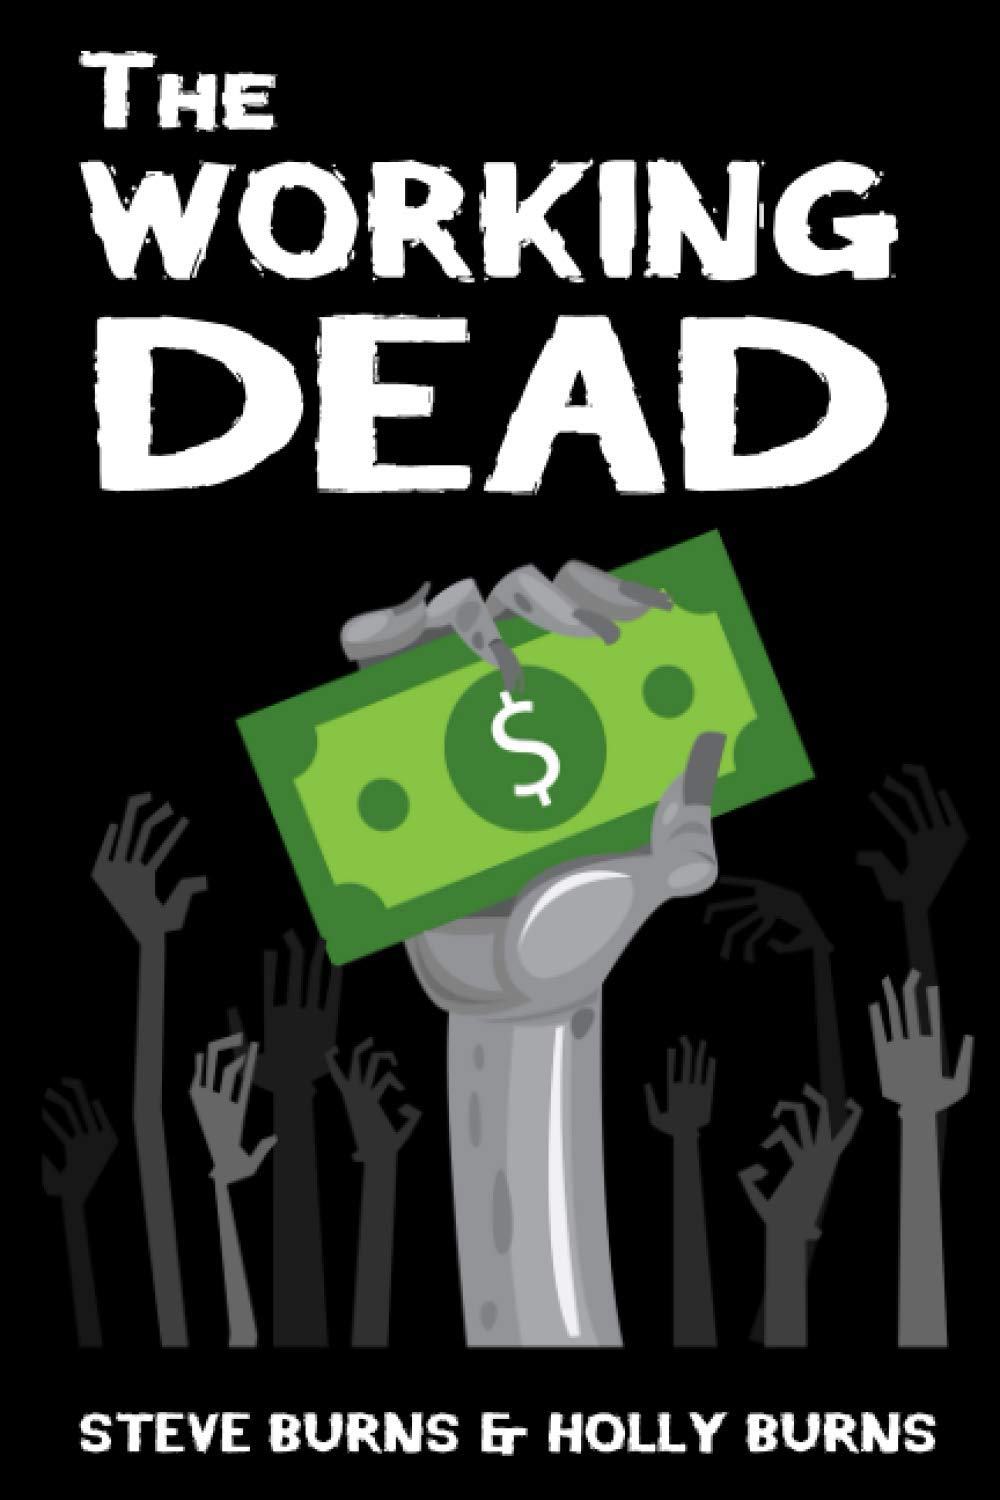 The Working Dead Paperback by Holly Burns (Author), Stephen Burns (Author)